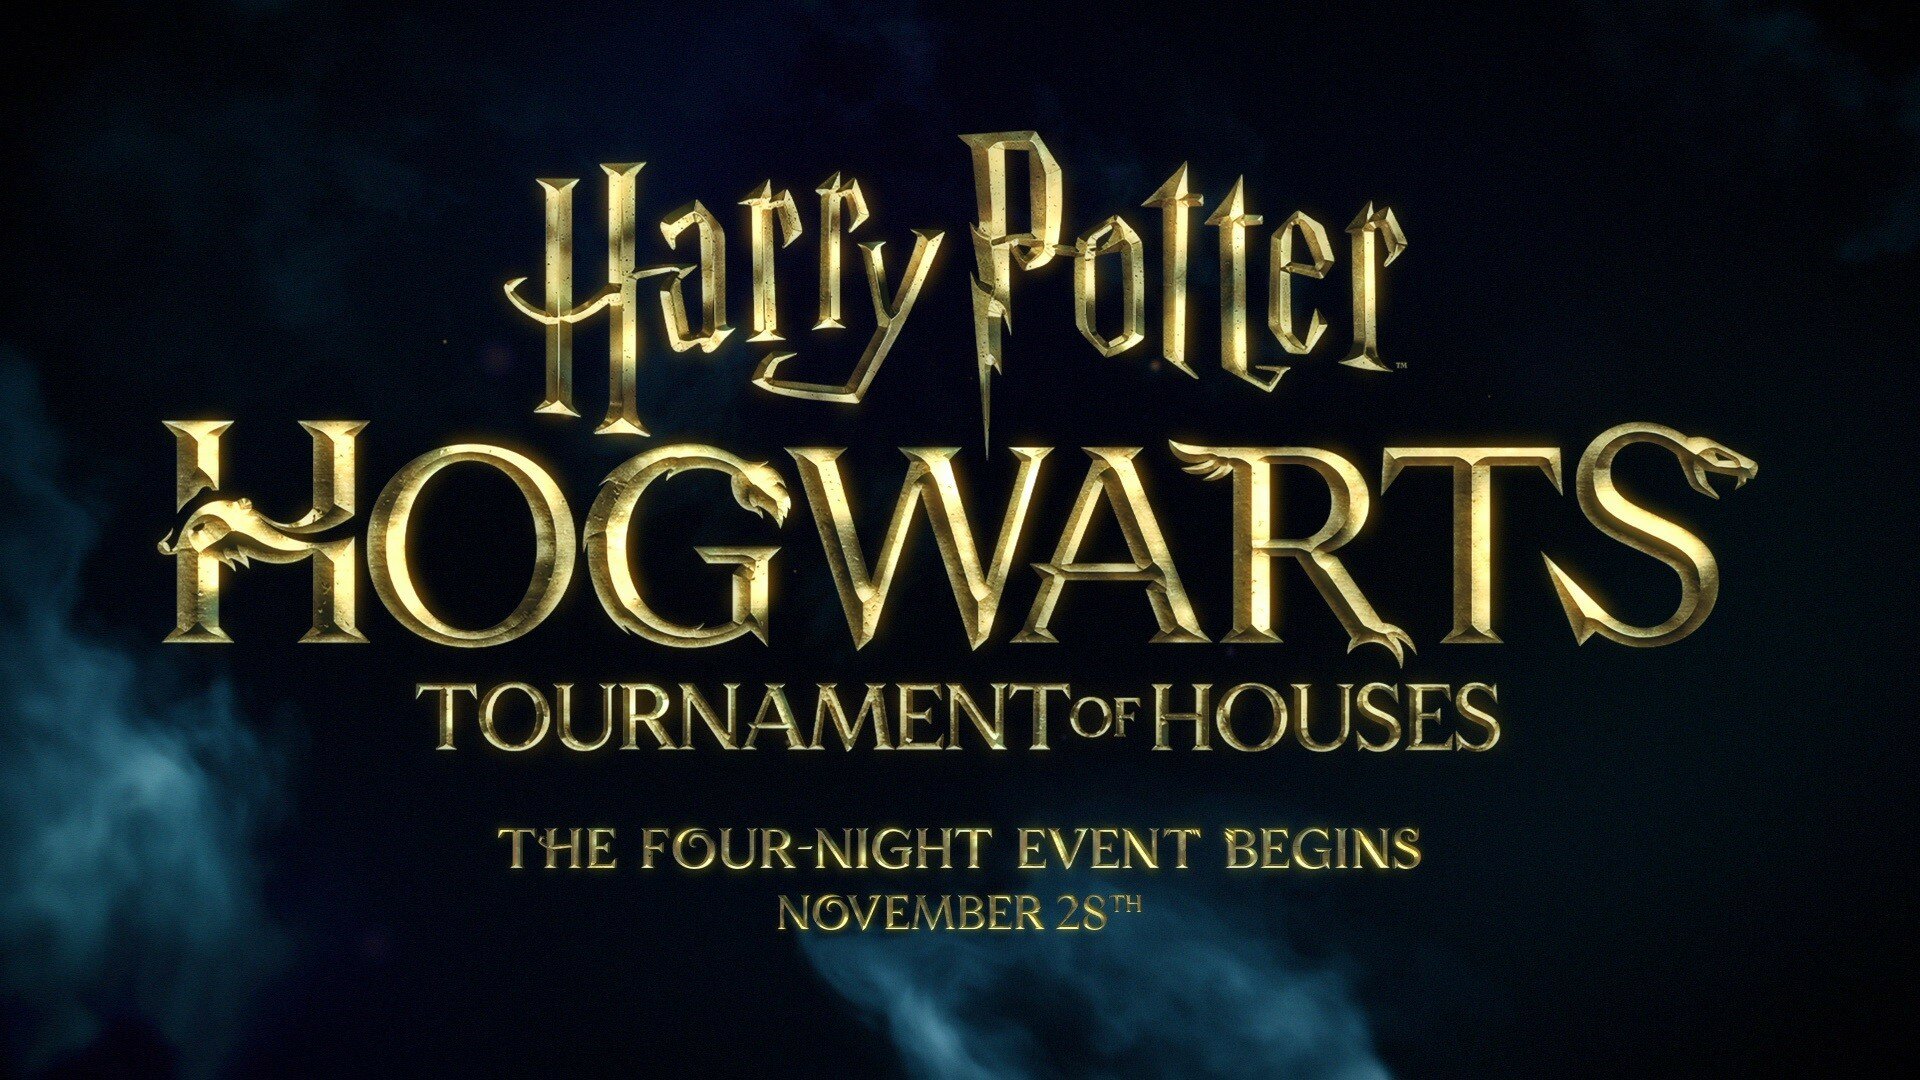 Harry Potter Hogwarts Tournament of Houses countdown how many days